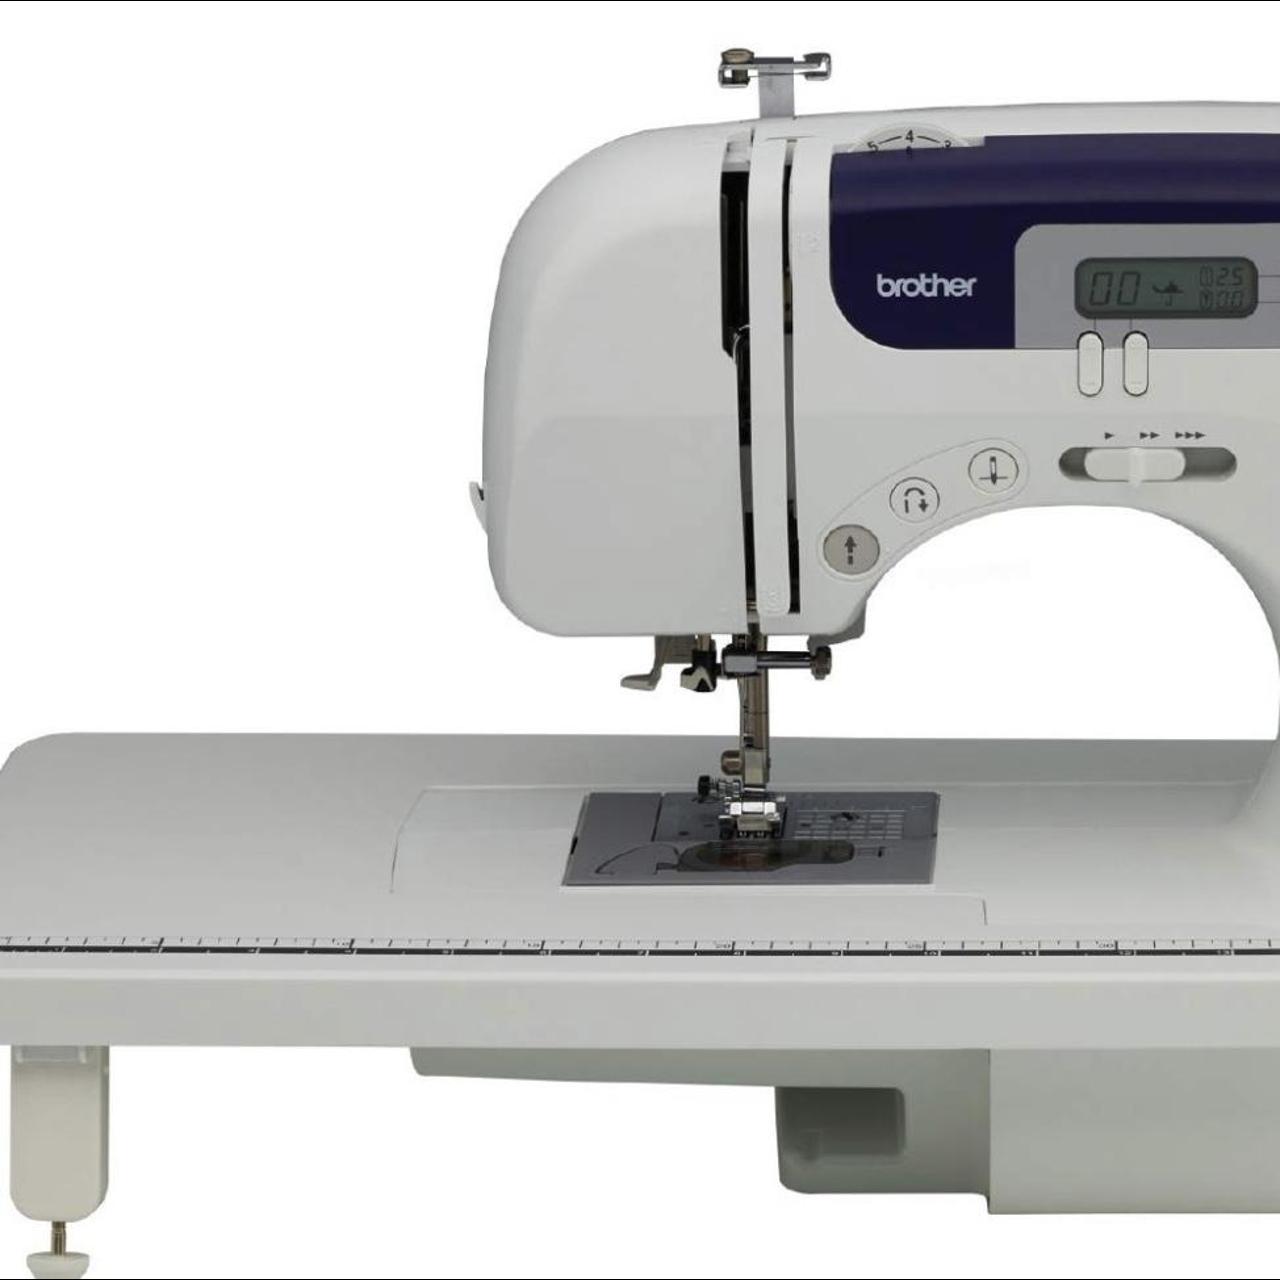 BROTHER SEWING MACHINE CS6000i Computerized sewing - Depop